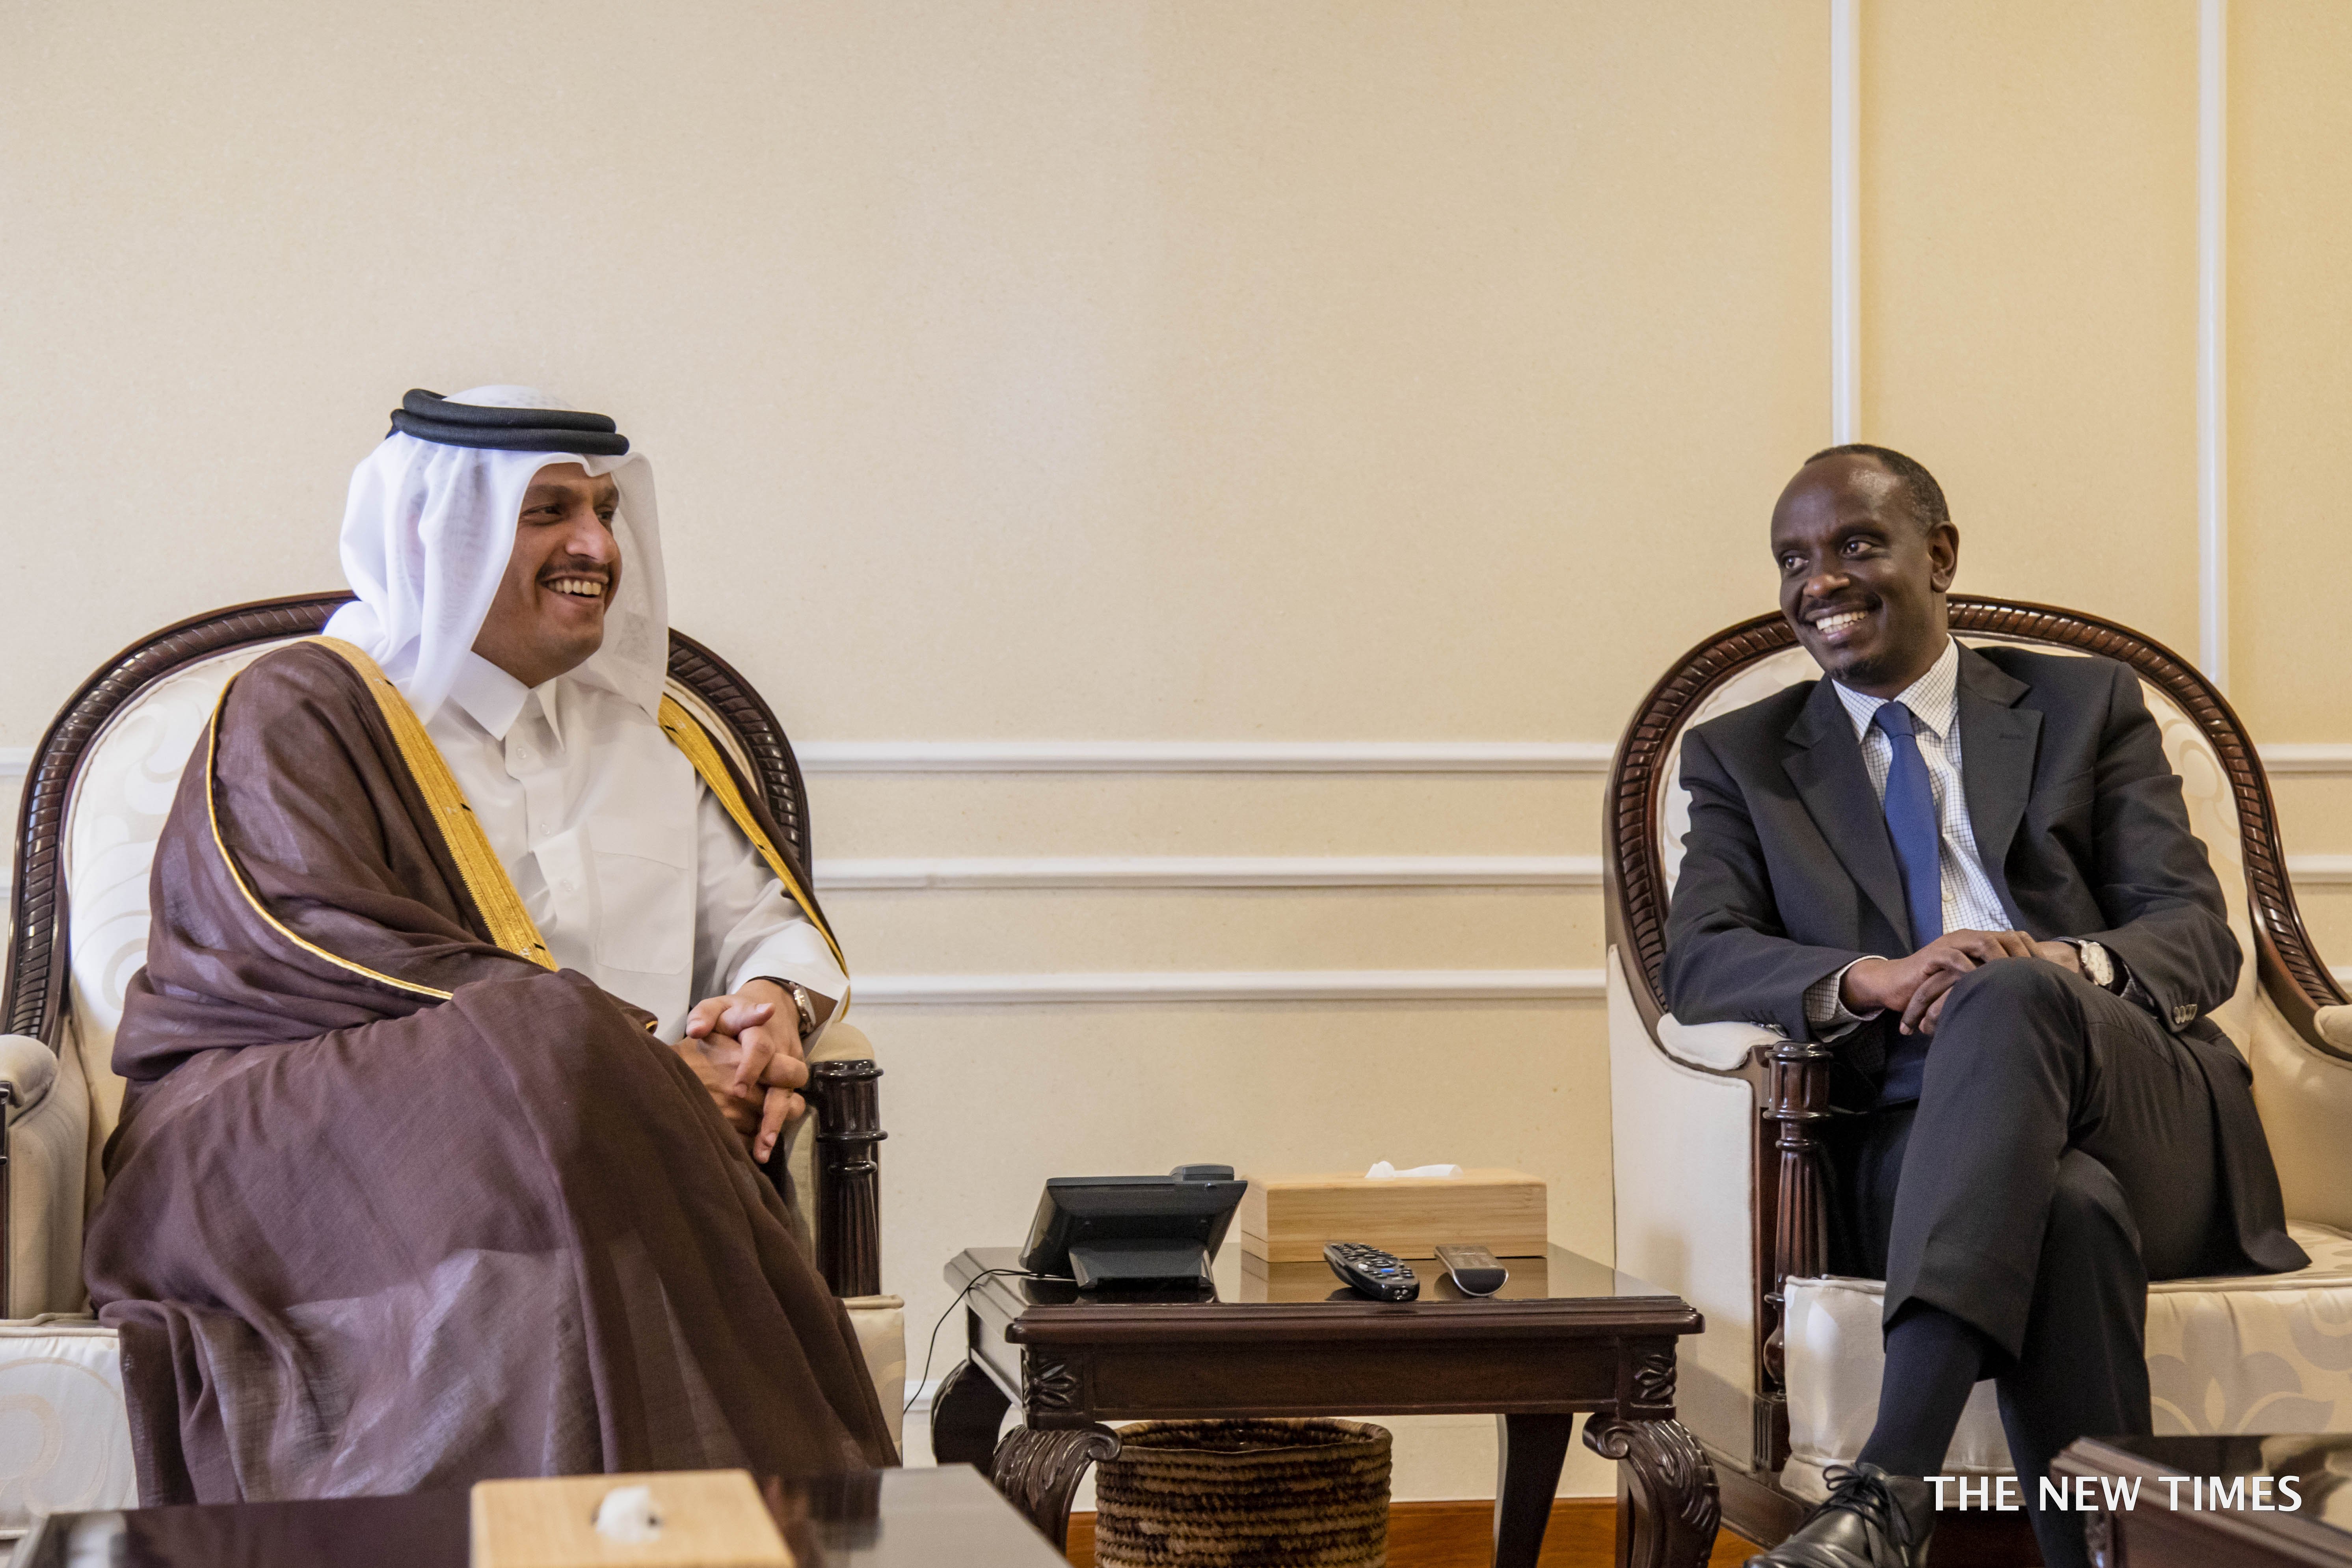 Sheikh Mohamed bin Abdulrahman Al Thani, Deputy Prime Minister and Minister of Foreign Affairs of Qatar, is received by Rwandaâ€™s Minister for Foreign Affairs Dr Richard Sezibera at Kigali International Airport on March 21, 2019. Emmanuel Kwizera.